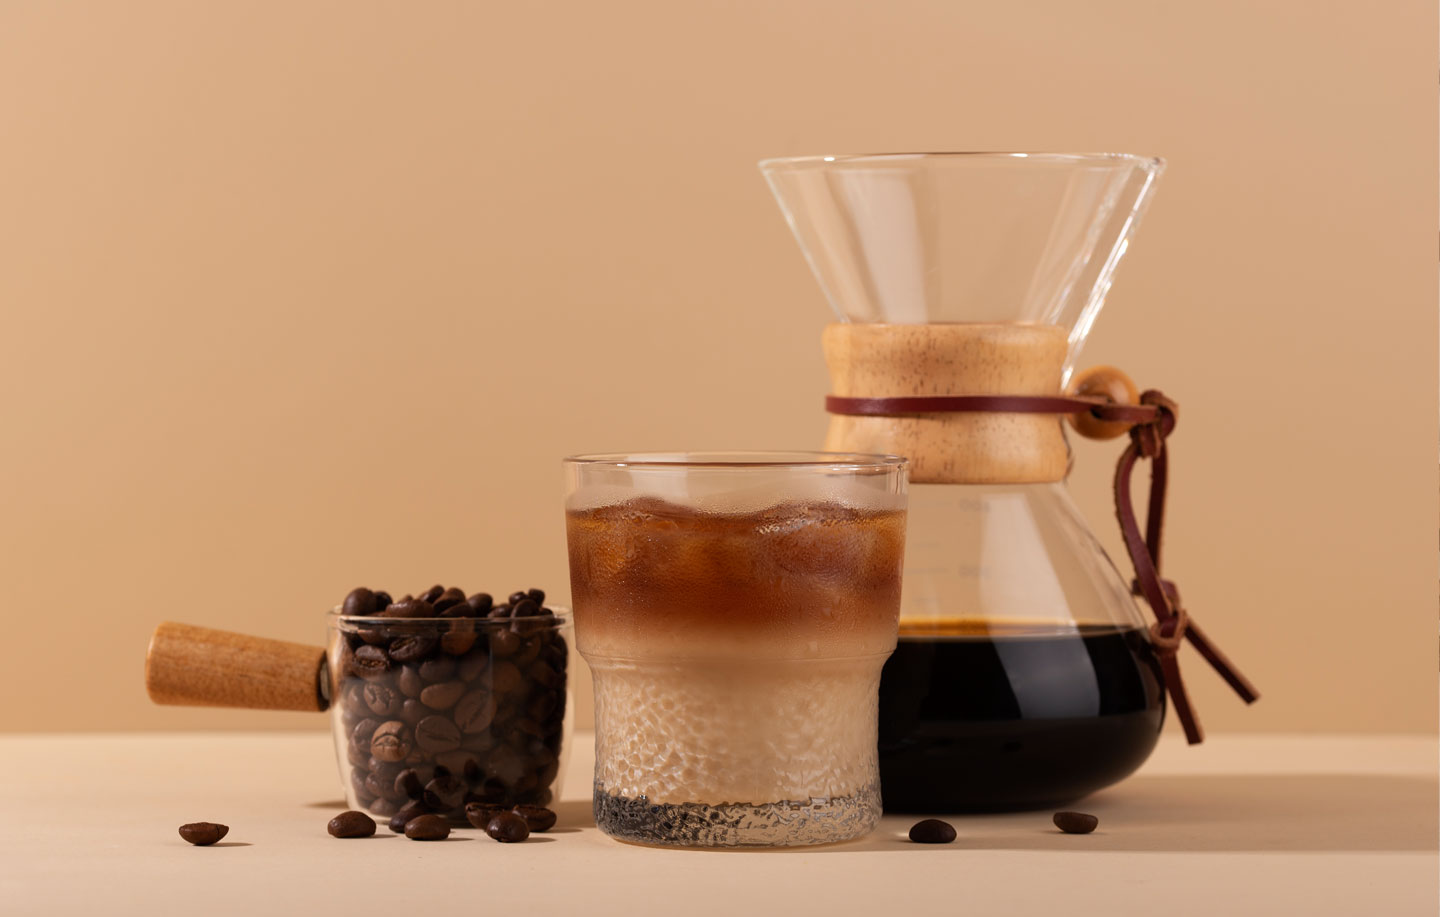 Cold Brew Coffee: let’s discover together with Jonathan the secrets of this delicious drink.